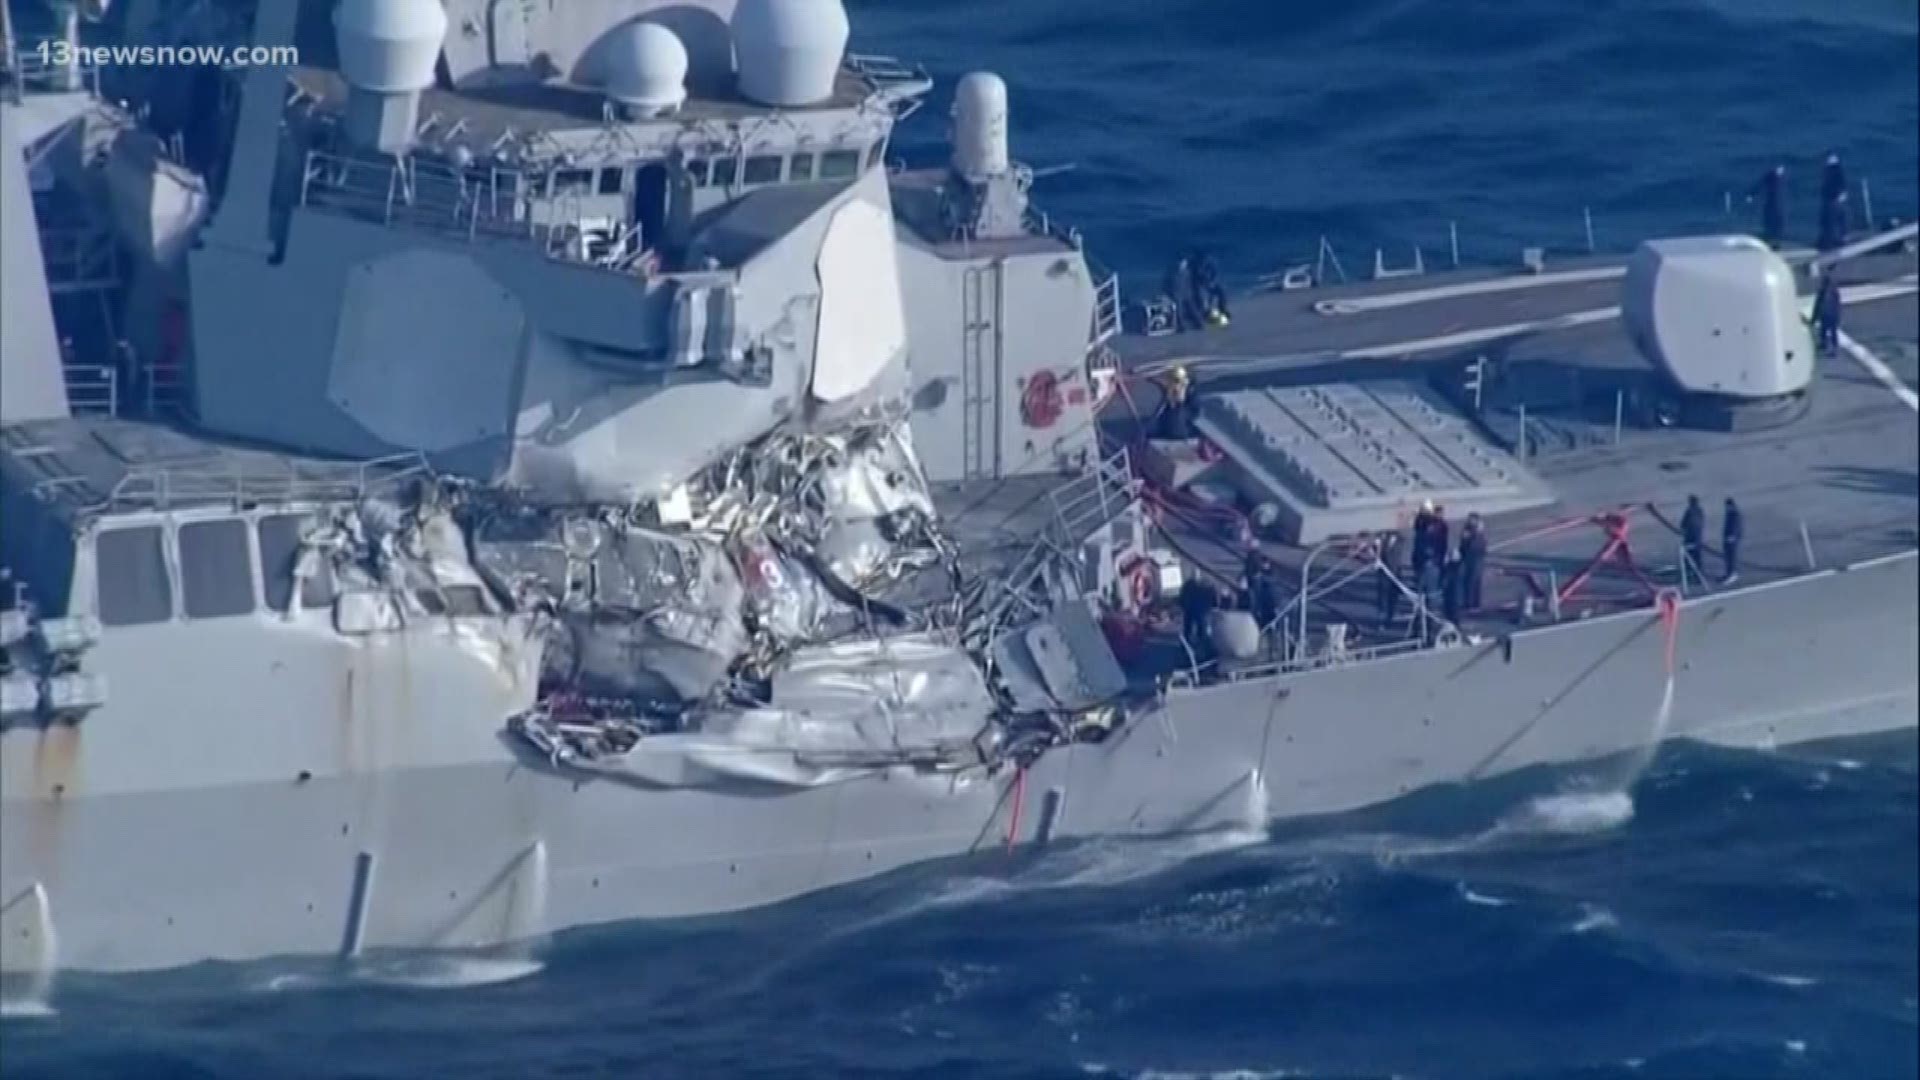 For the fifth time since 2017, the House Armed Services Committee met to examine the deadly USS Fitzgerald and USS McCain collisions.